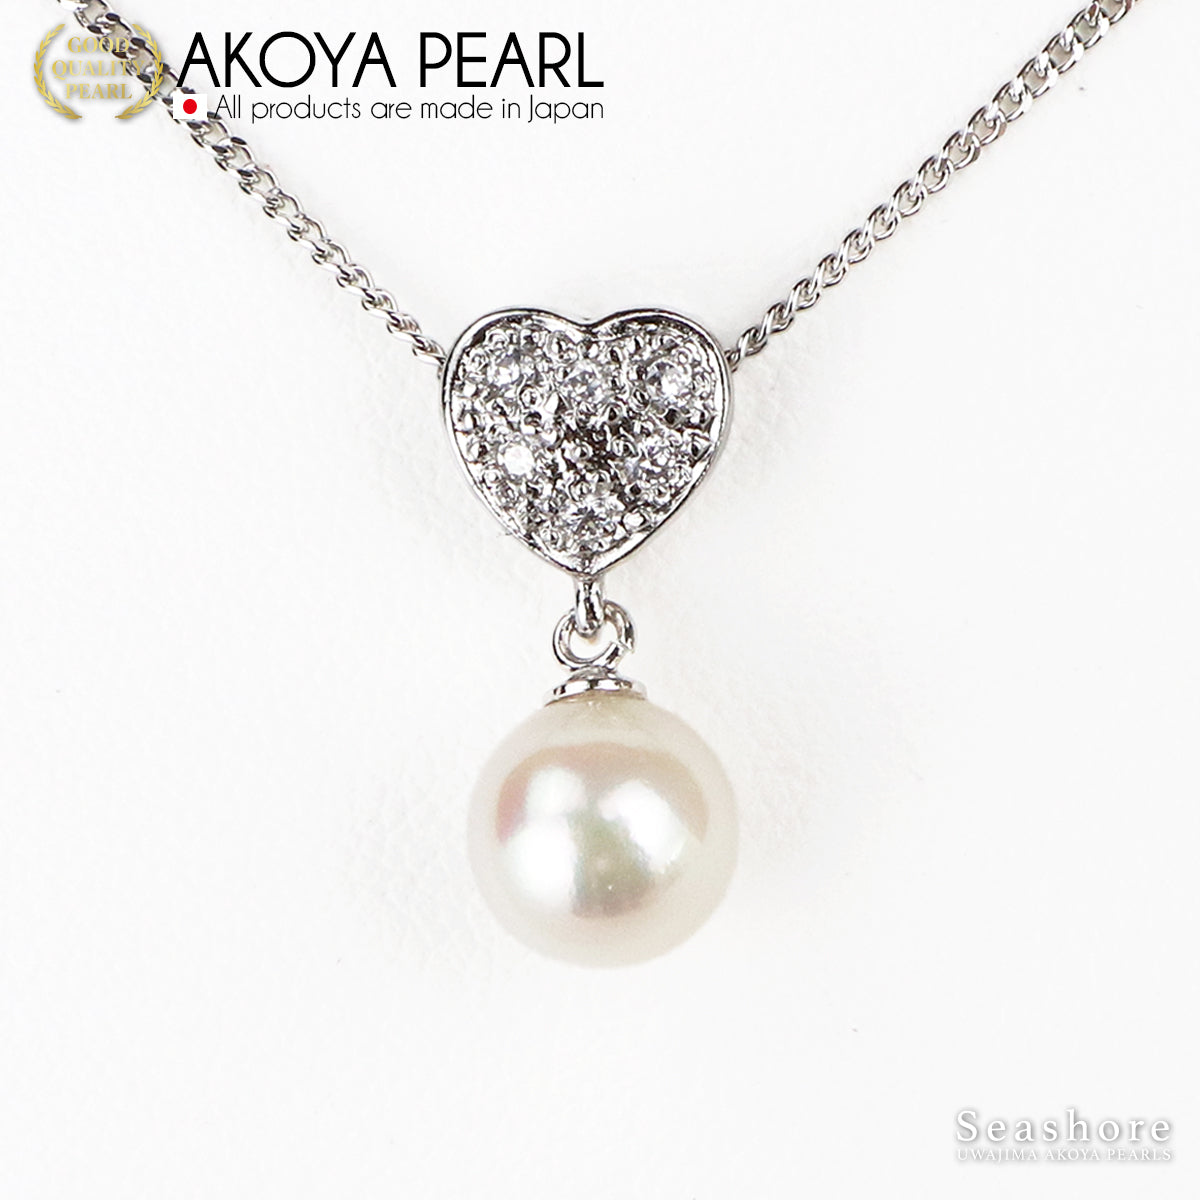 Akoya Pearl Pave Heart Necklace White [7.5-8.0mm] SV925 Platinum Finish Pearl Pendant (4036)